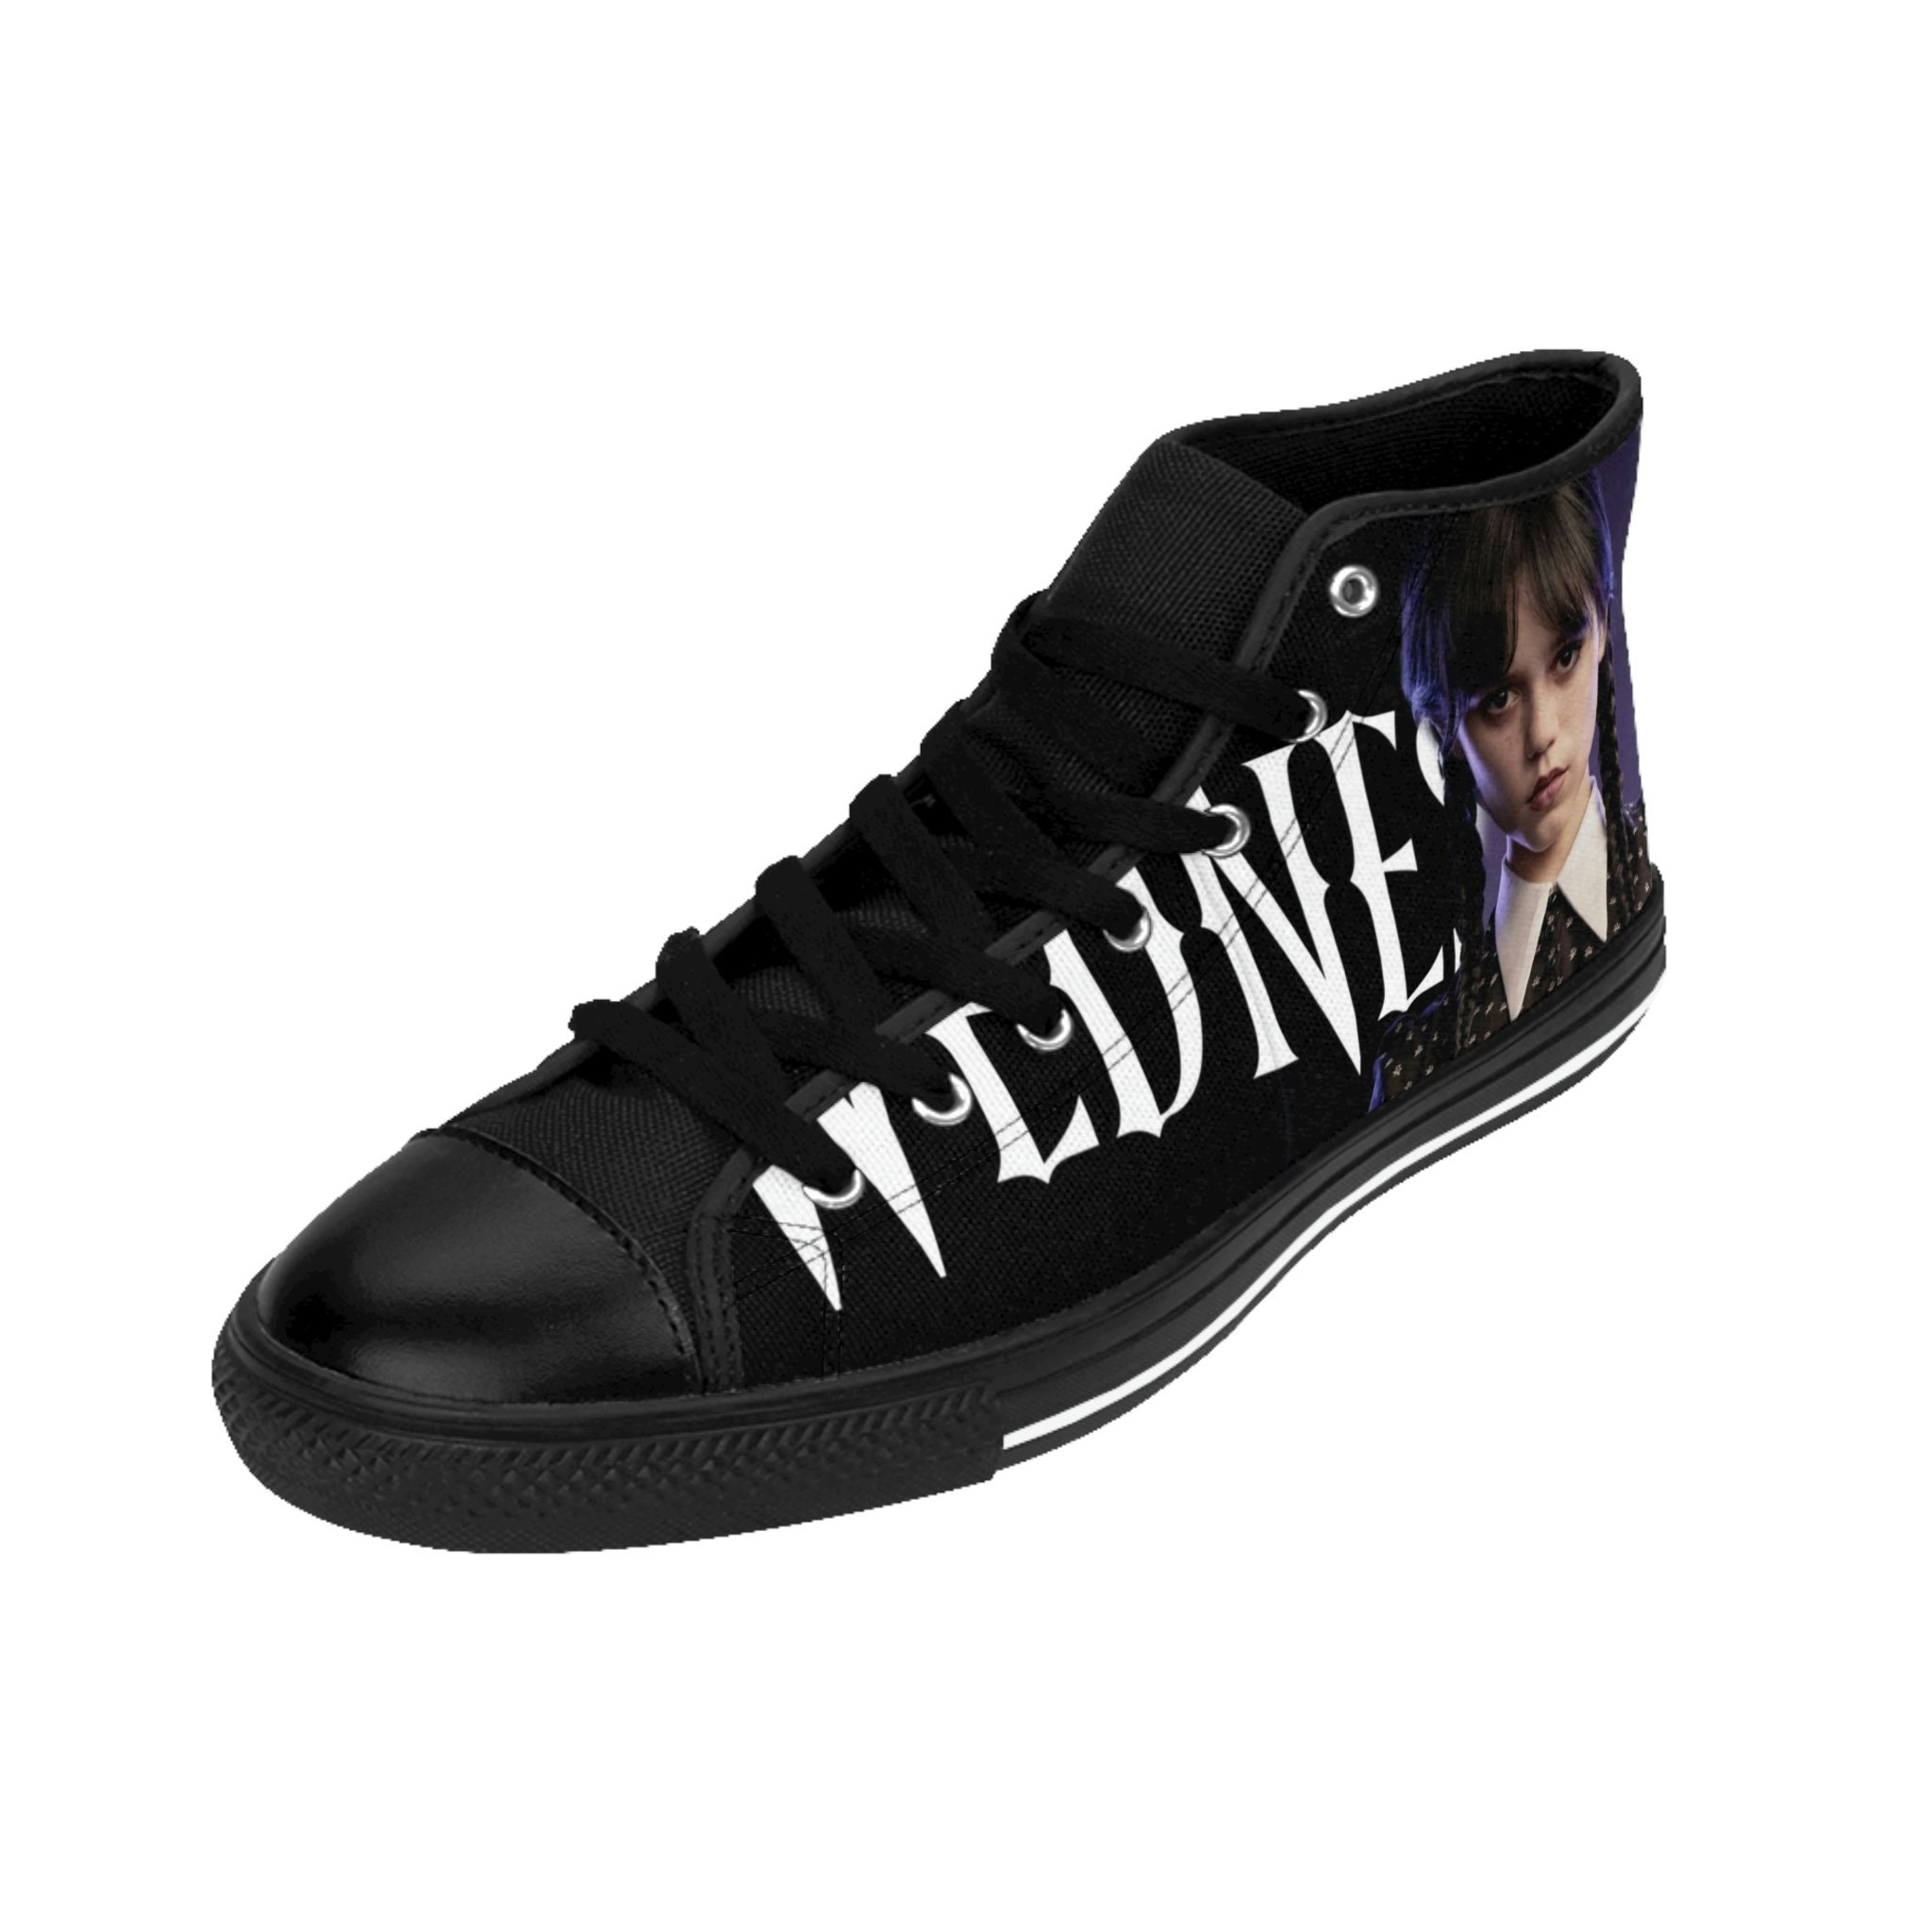 Discover Wednesday addams Shoes, Wednesday addams High Top Sneakers